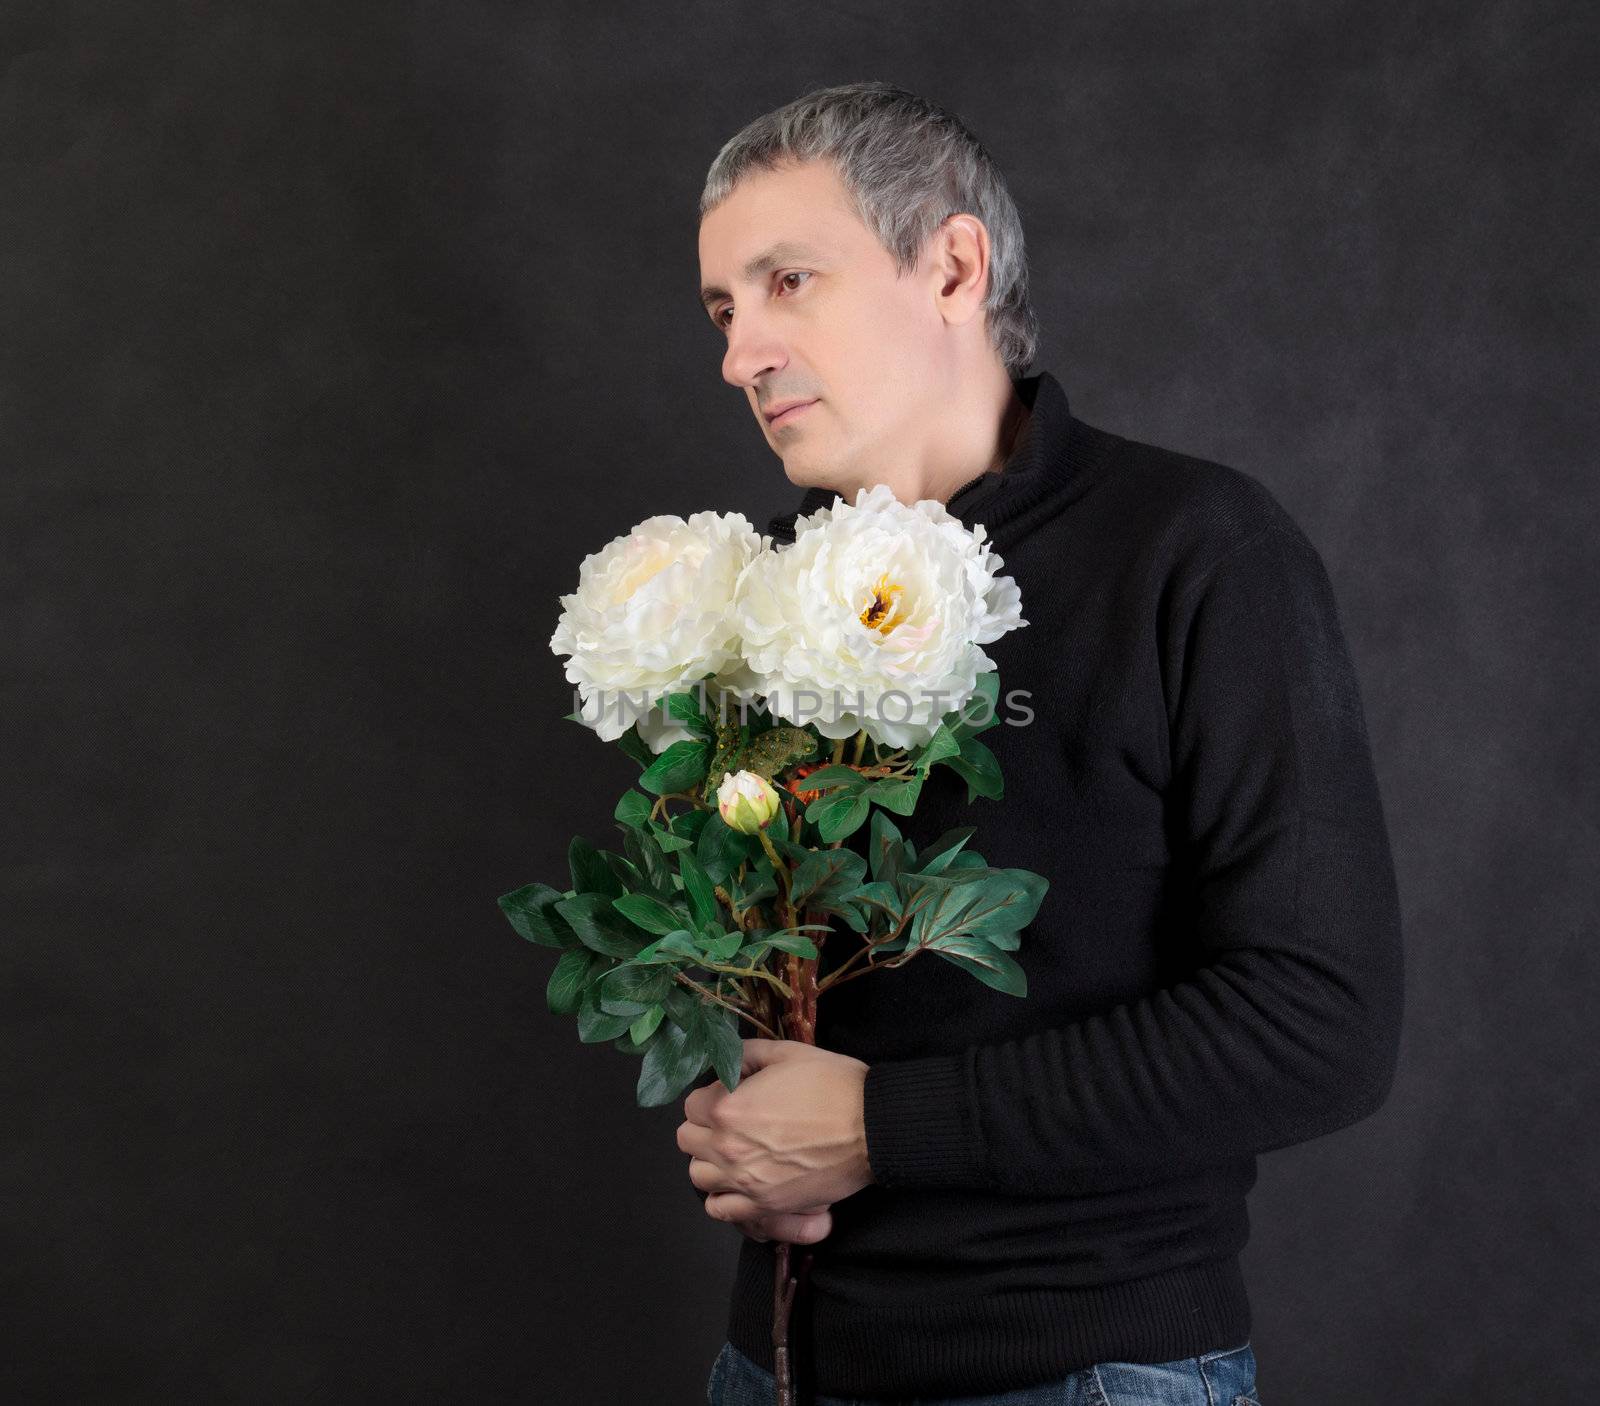 Man holding a bouquet of flowers on gray background